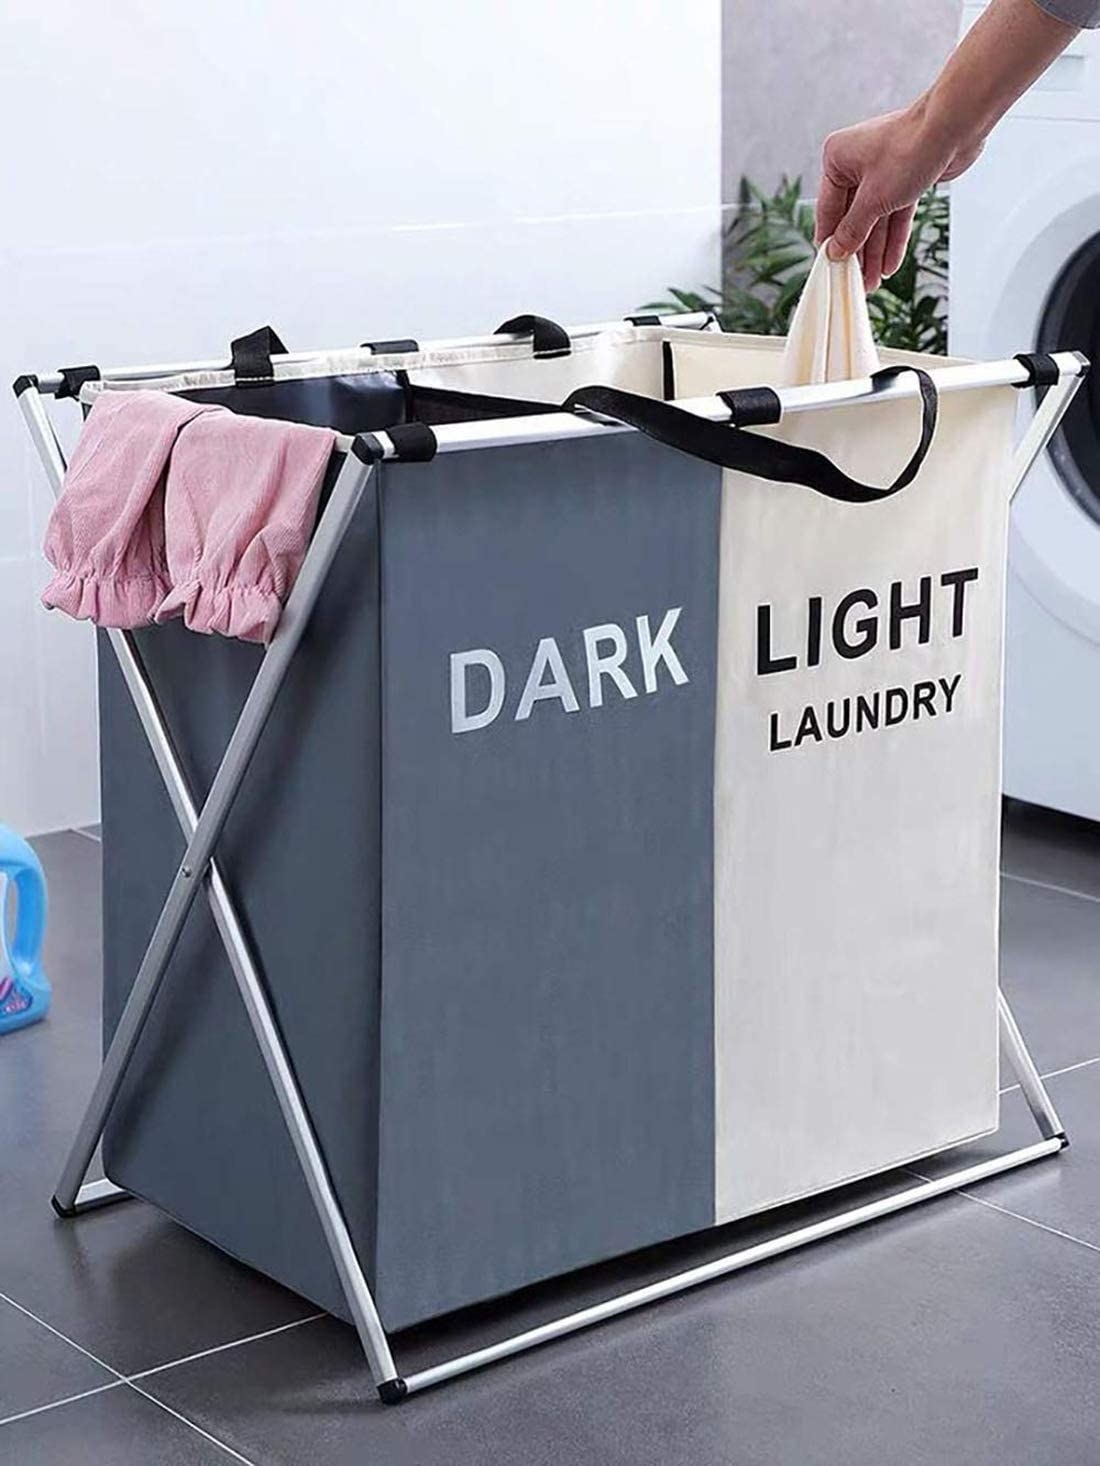 A person drops a clothing item into the light side of the divided laundry hamper